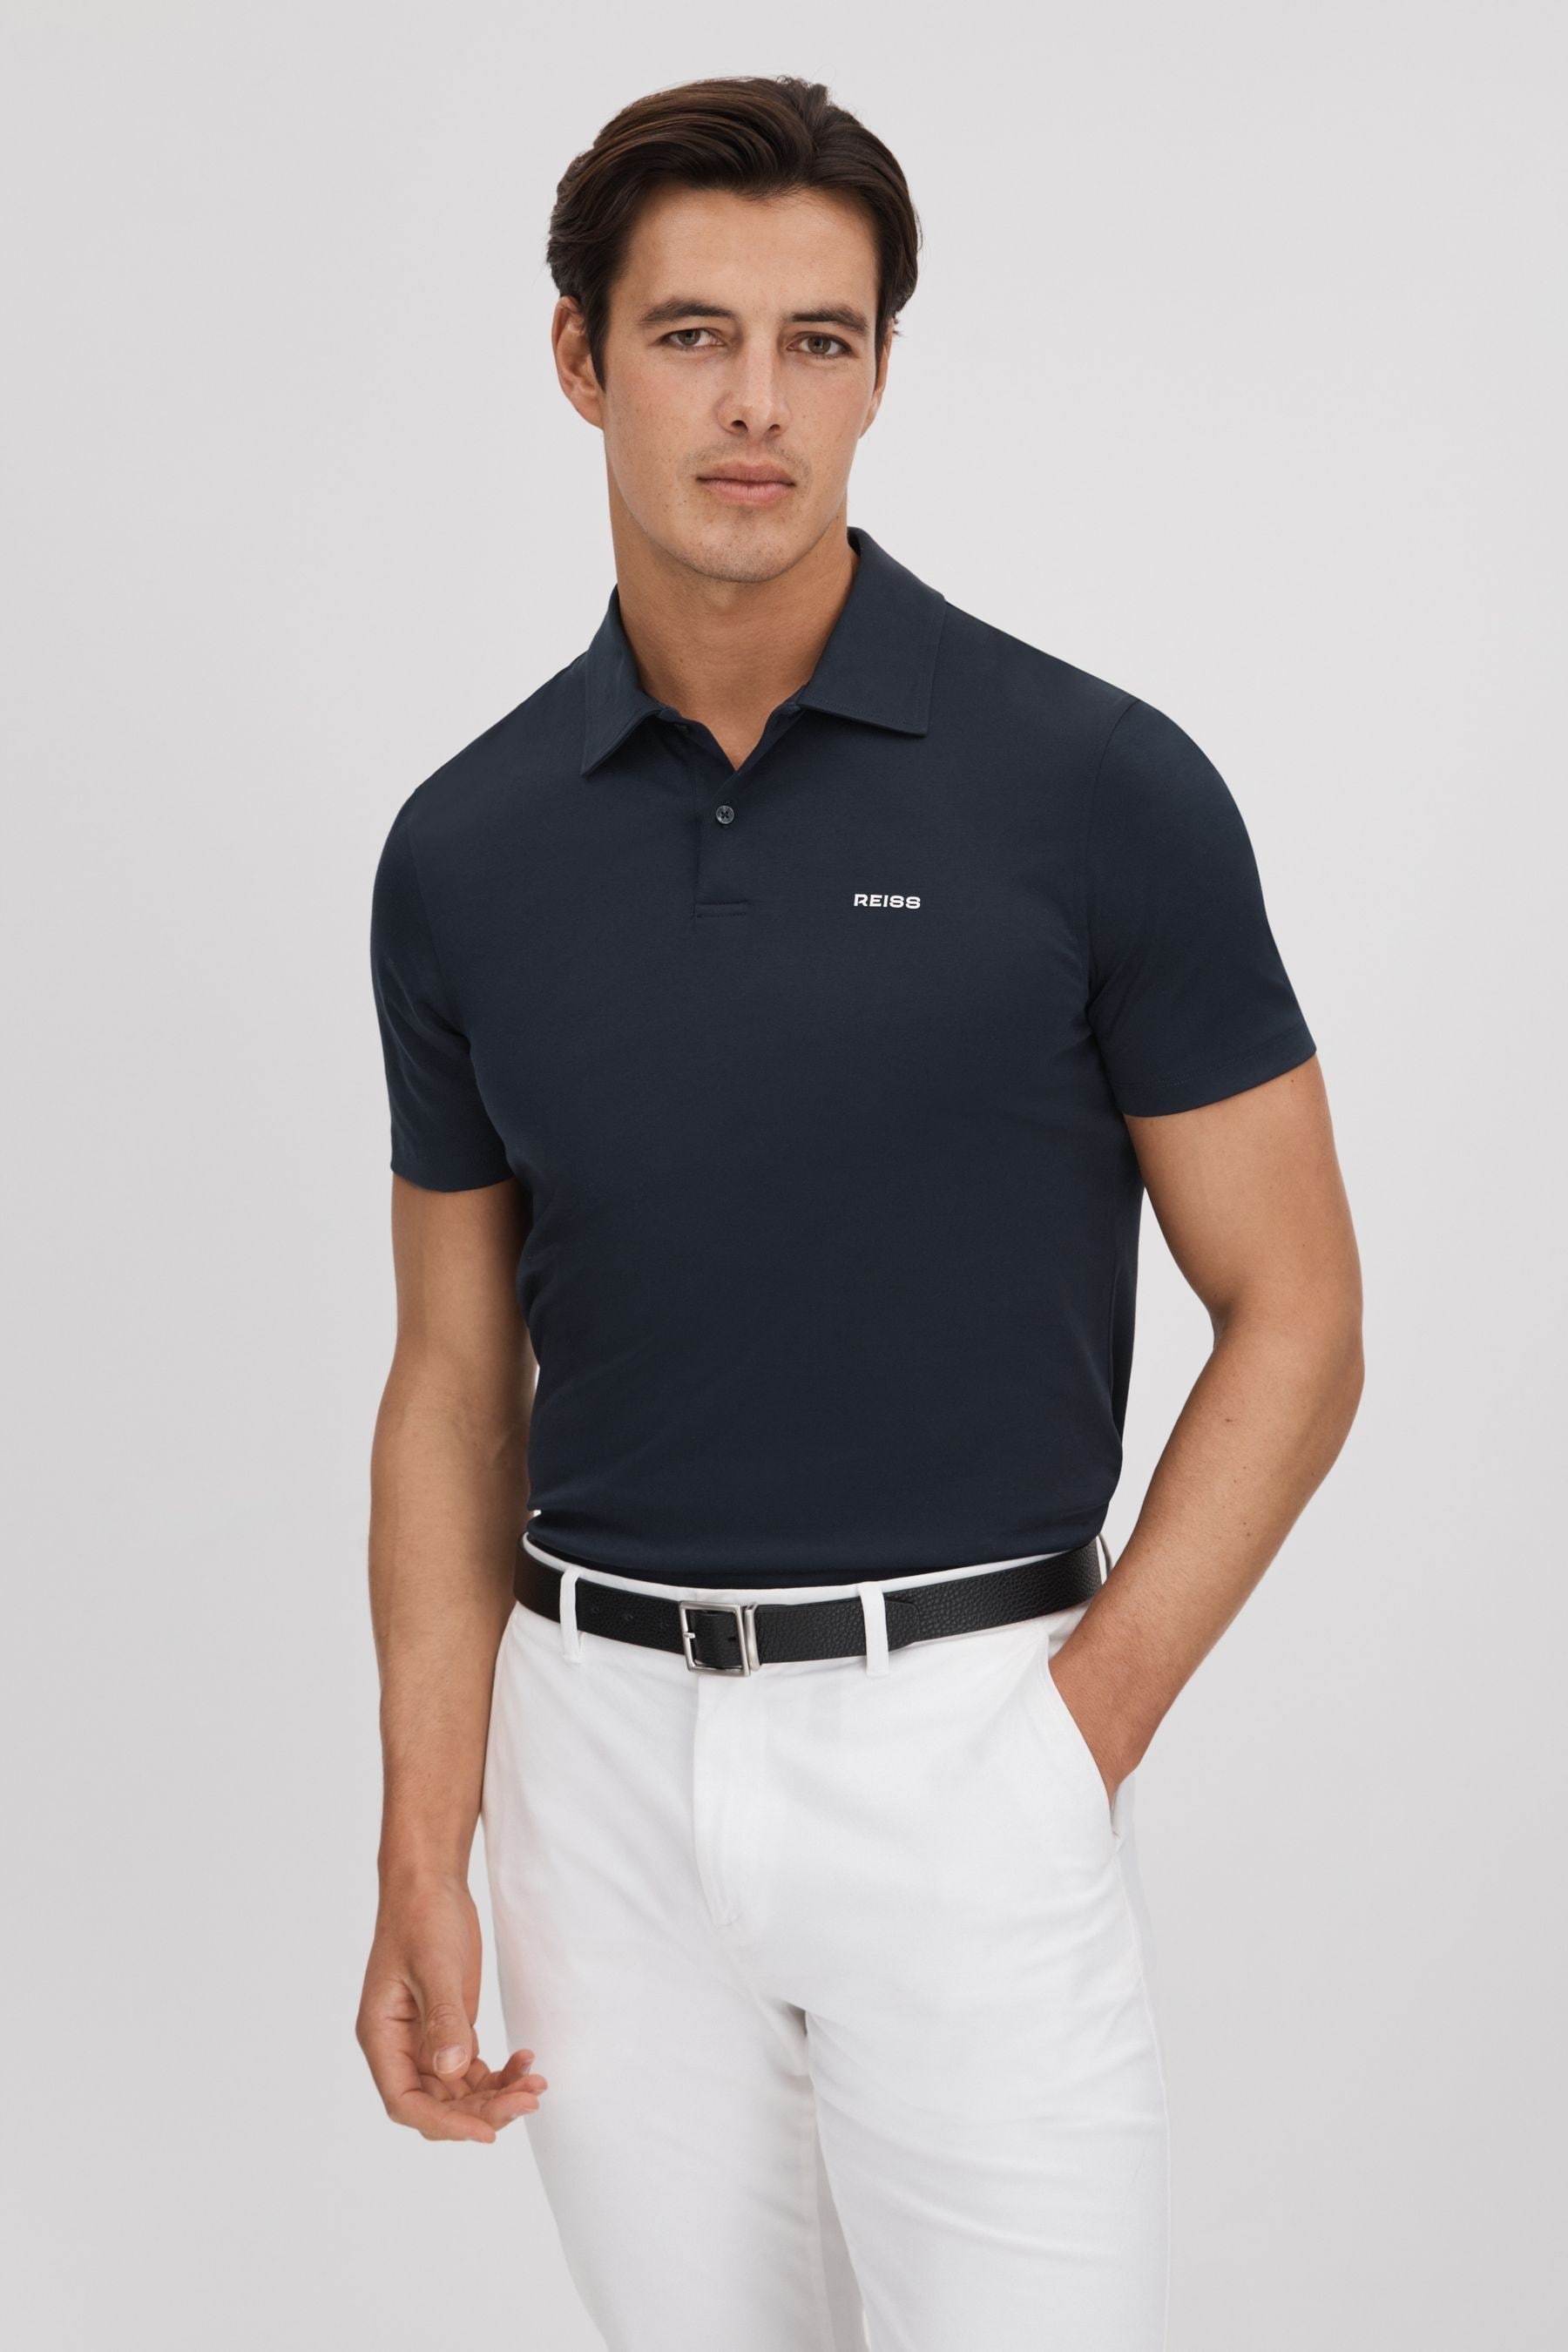 Reiss Owens - Navy Slim Fit Cotton Polo Shirt, S